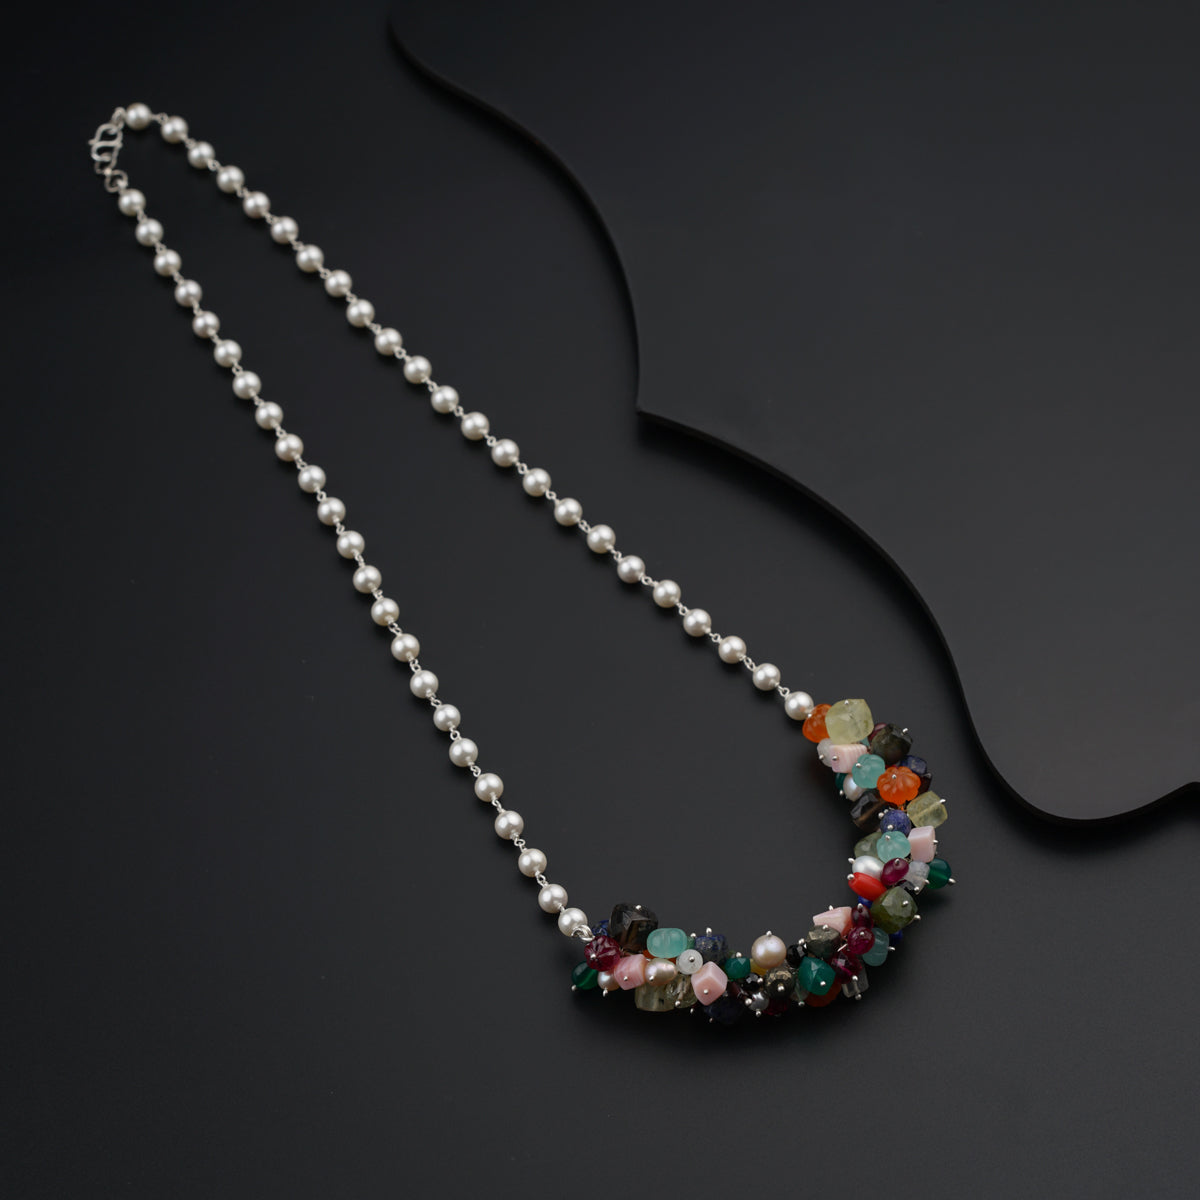 a necklace with pearls and beads on a black surface